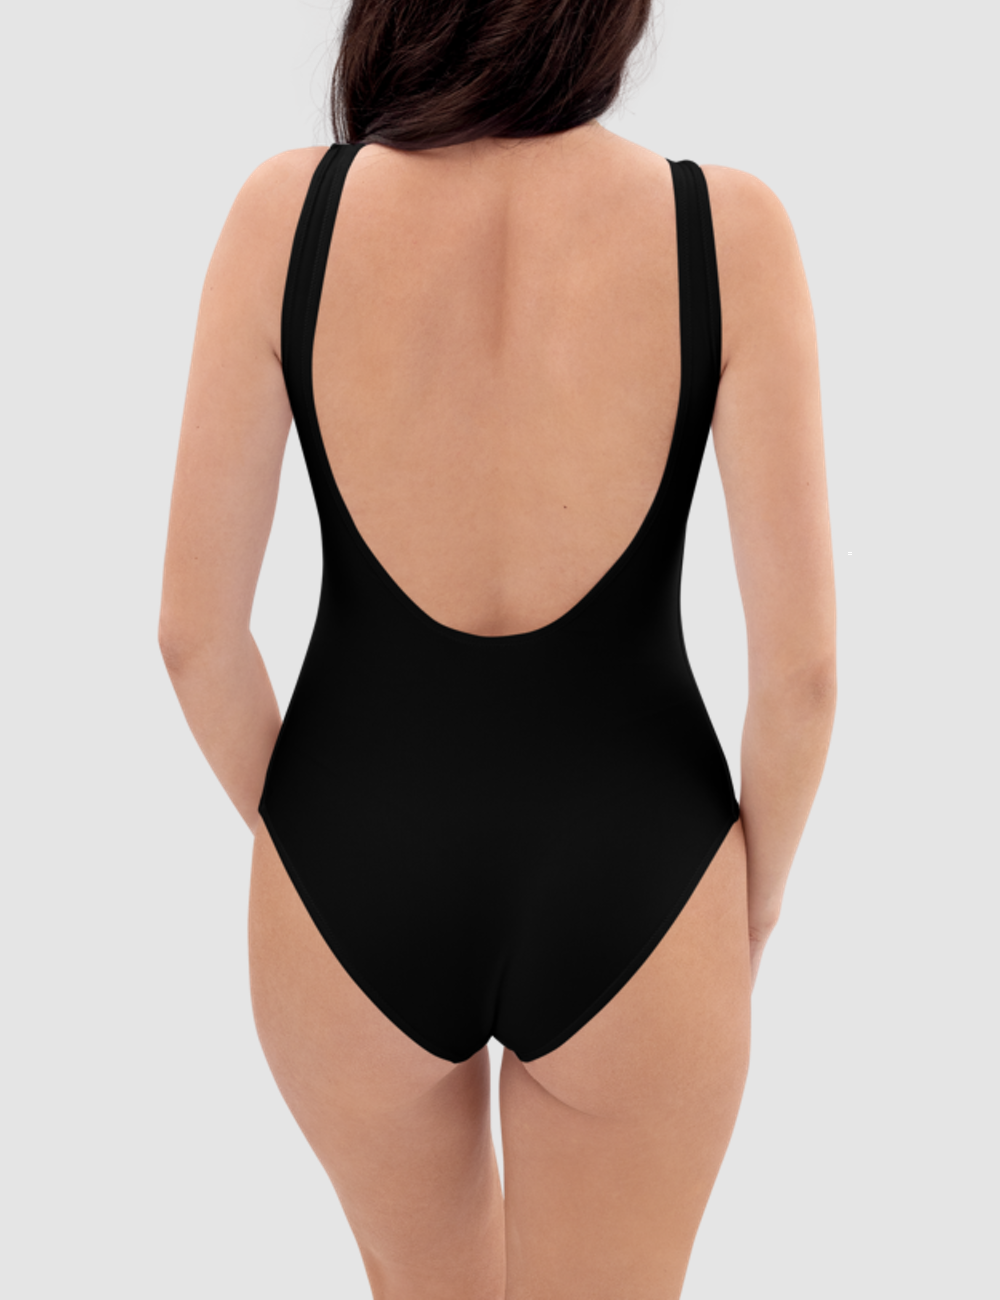 Outlaws Refuge | Women's One-Piece Swimsuit OniTakai